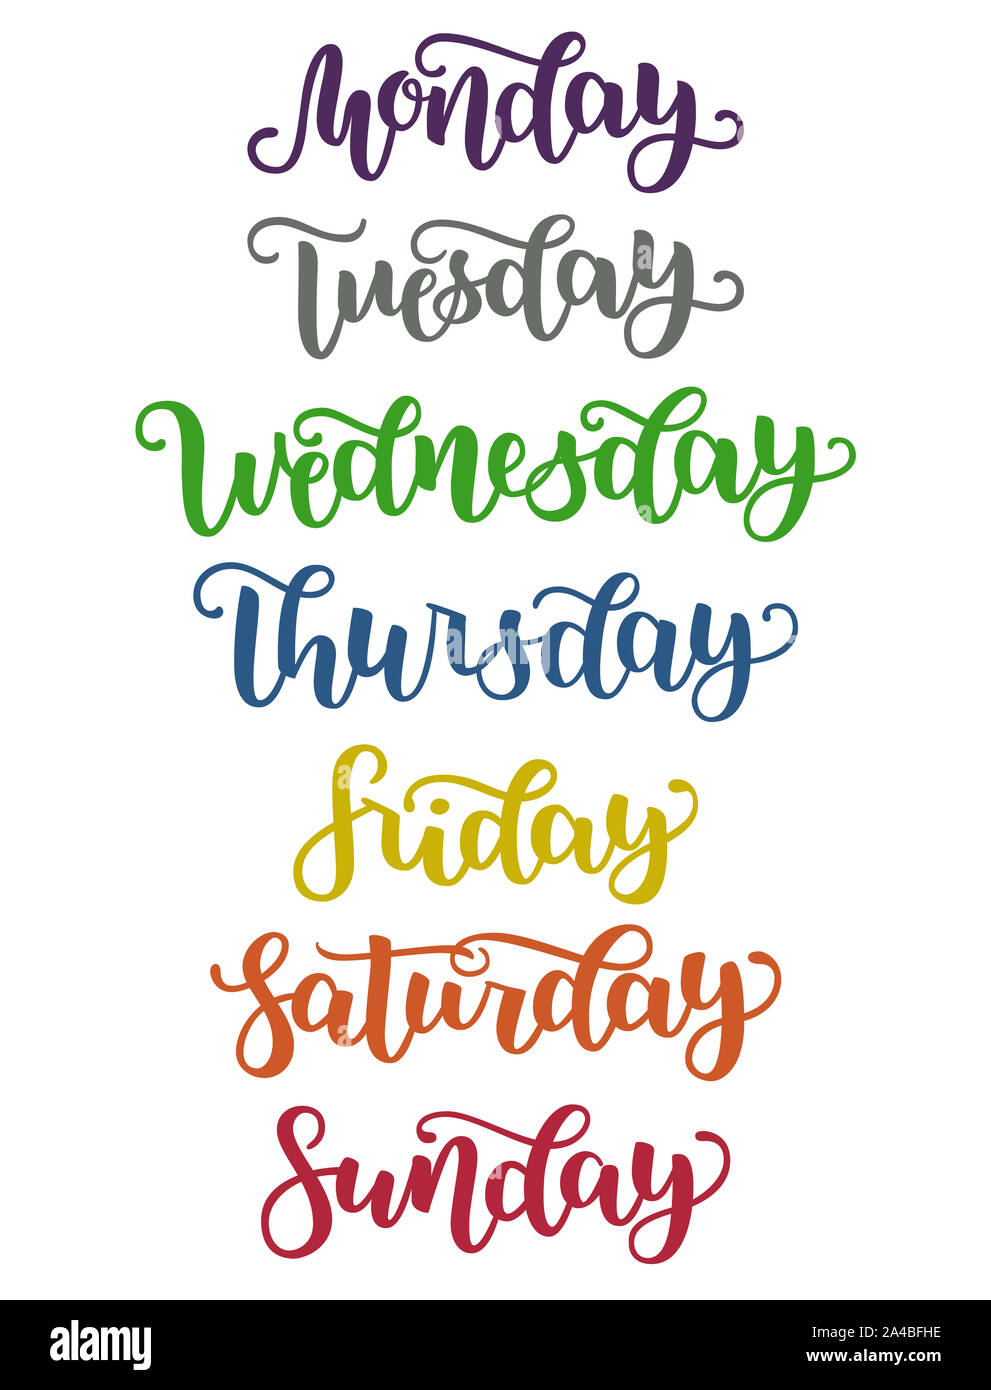 Premium Vector  Days of the week in lettering monday tuesday wednesday  thursday friday saturday sunday